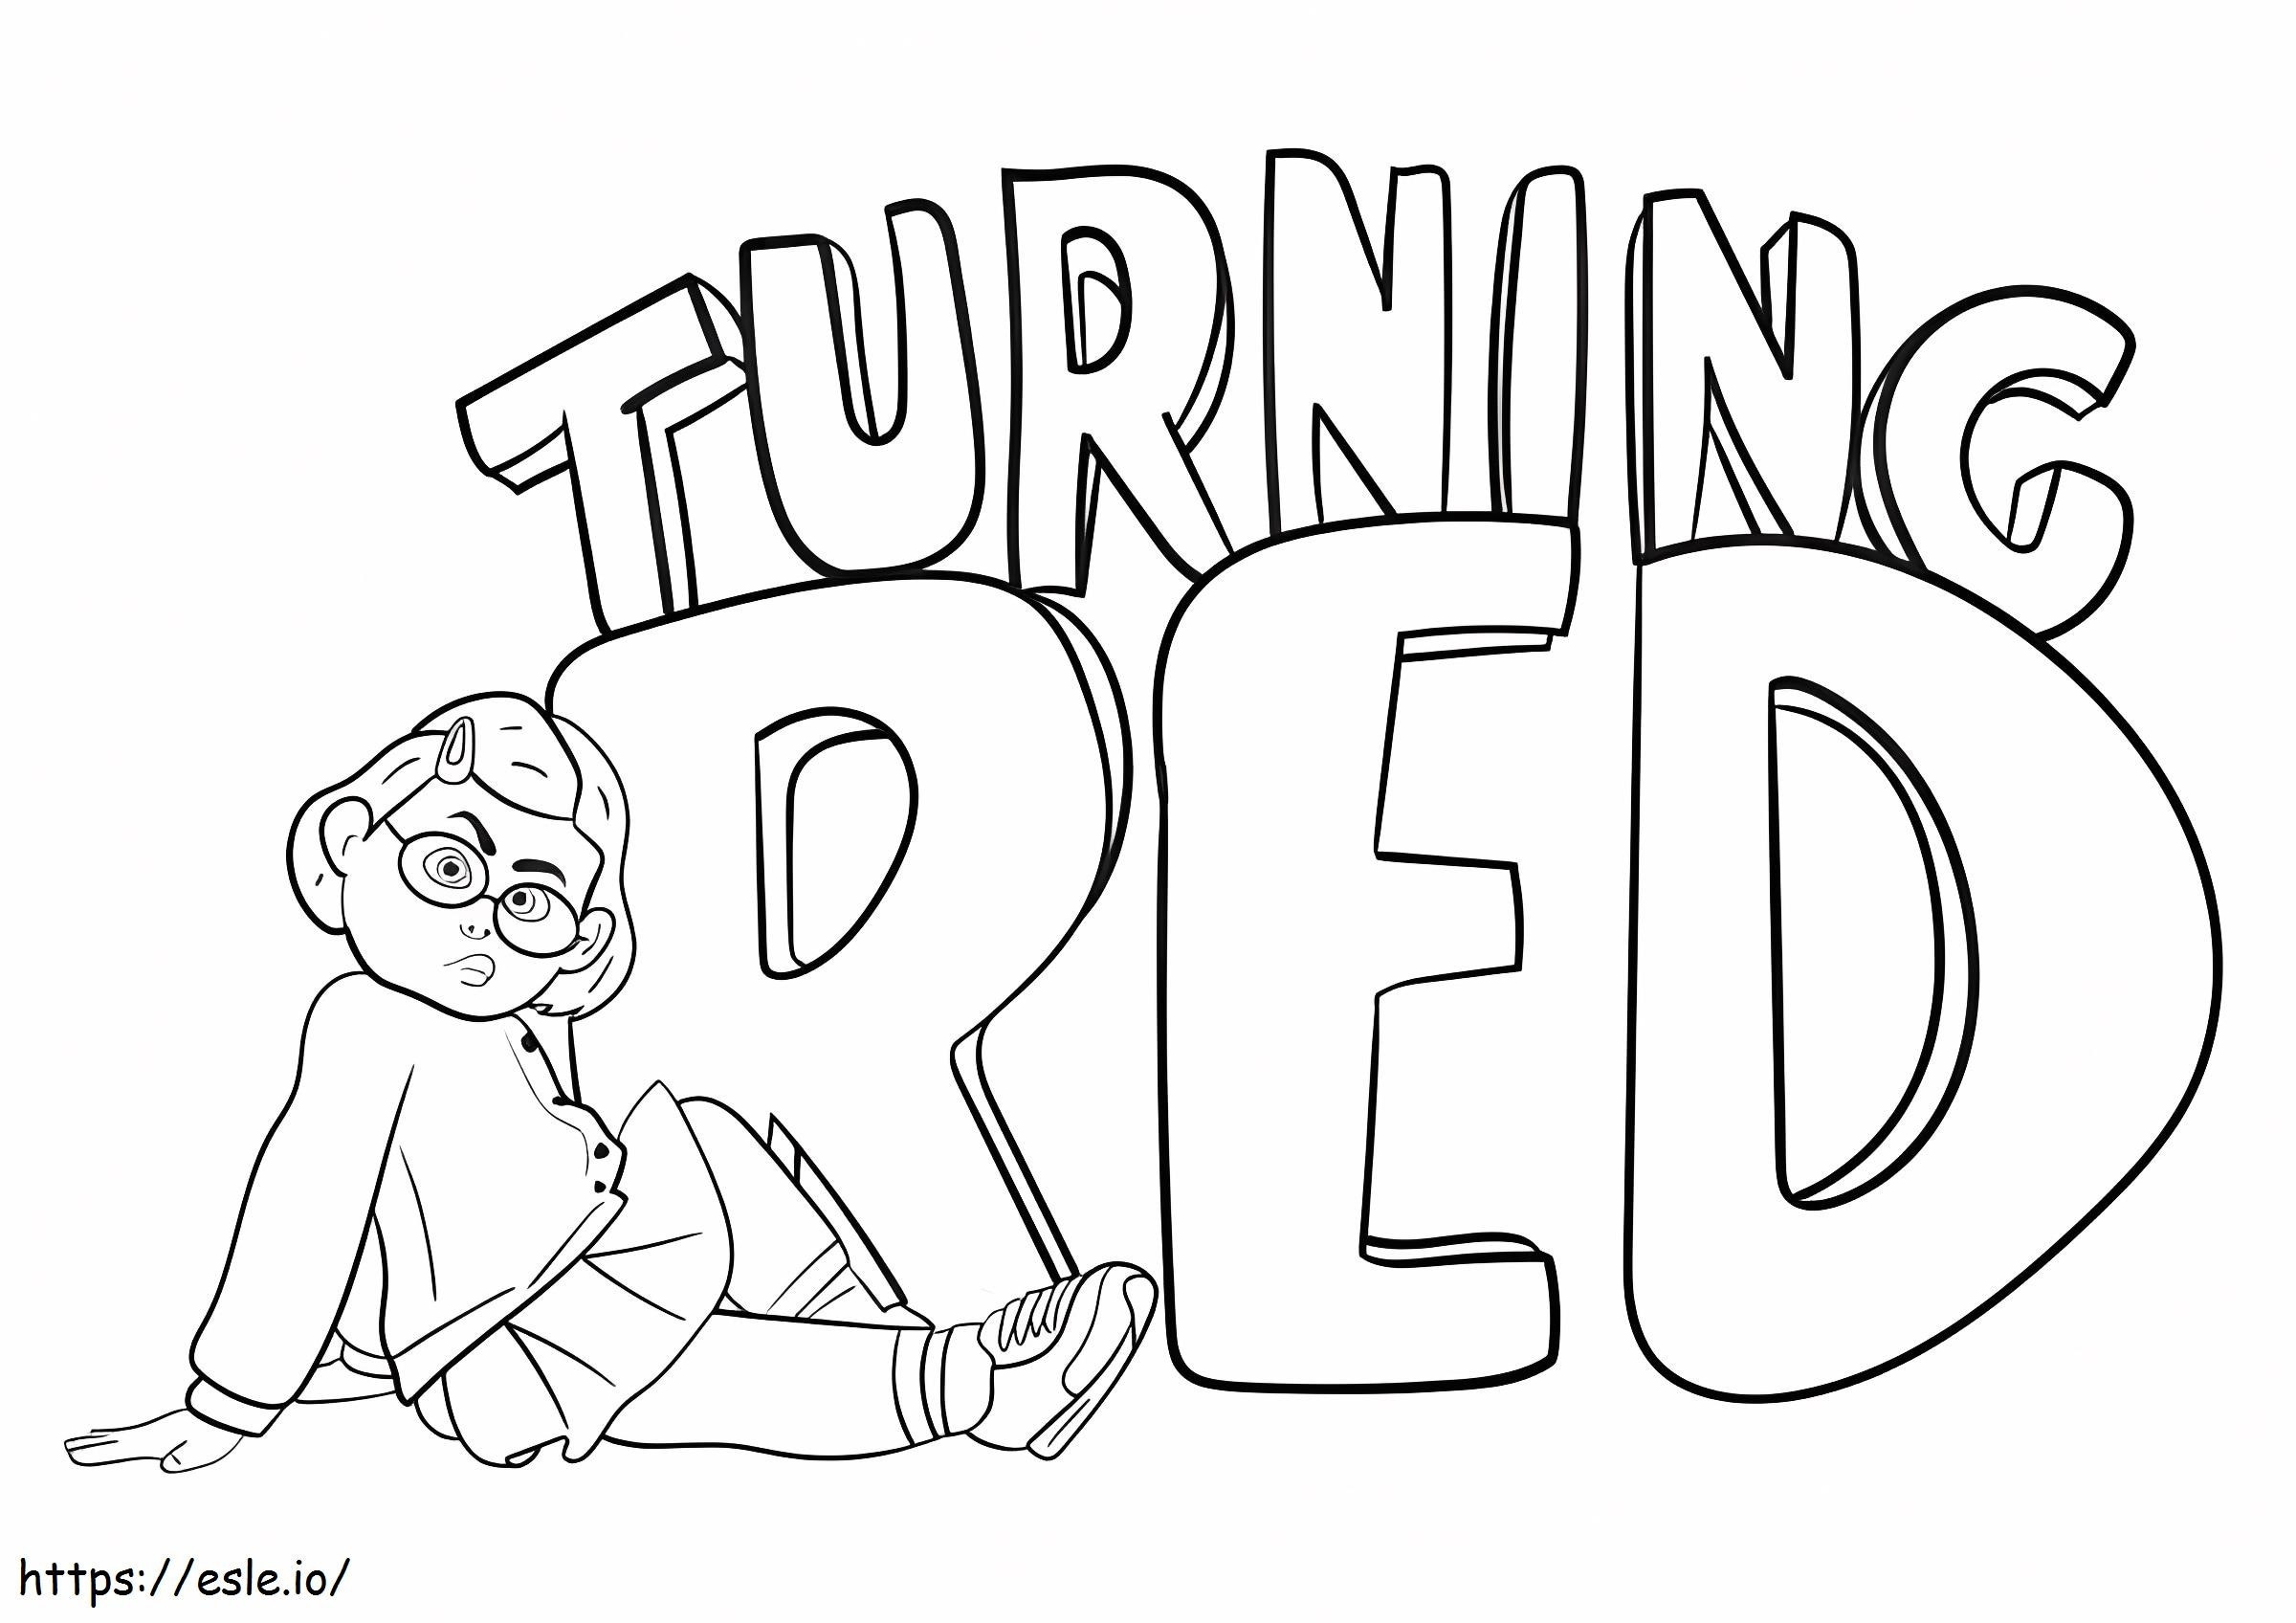 Turning Red For Kids coloring page